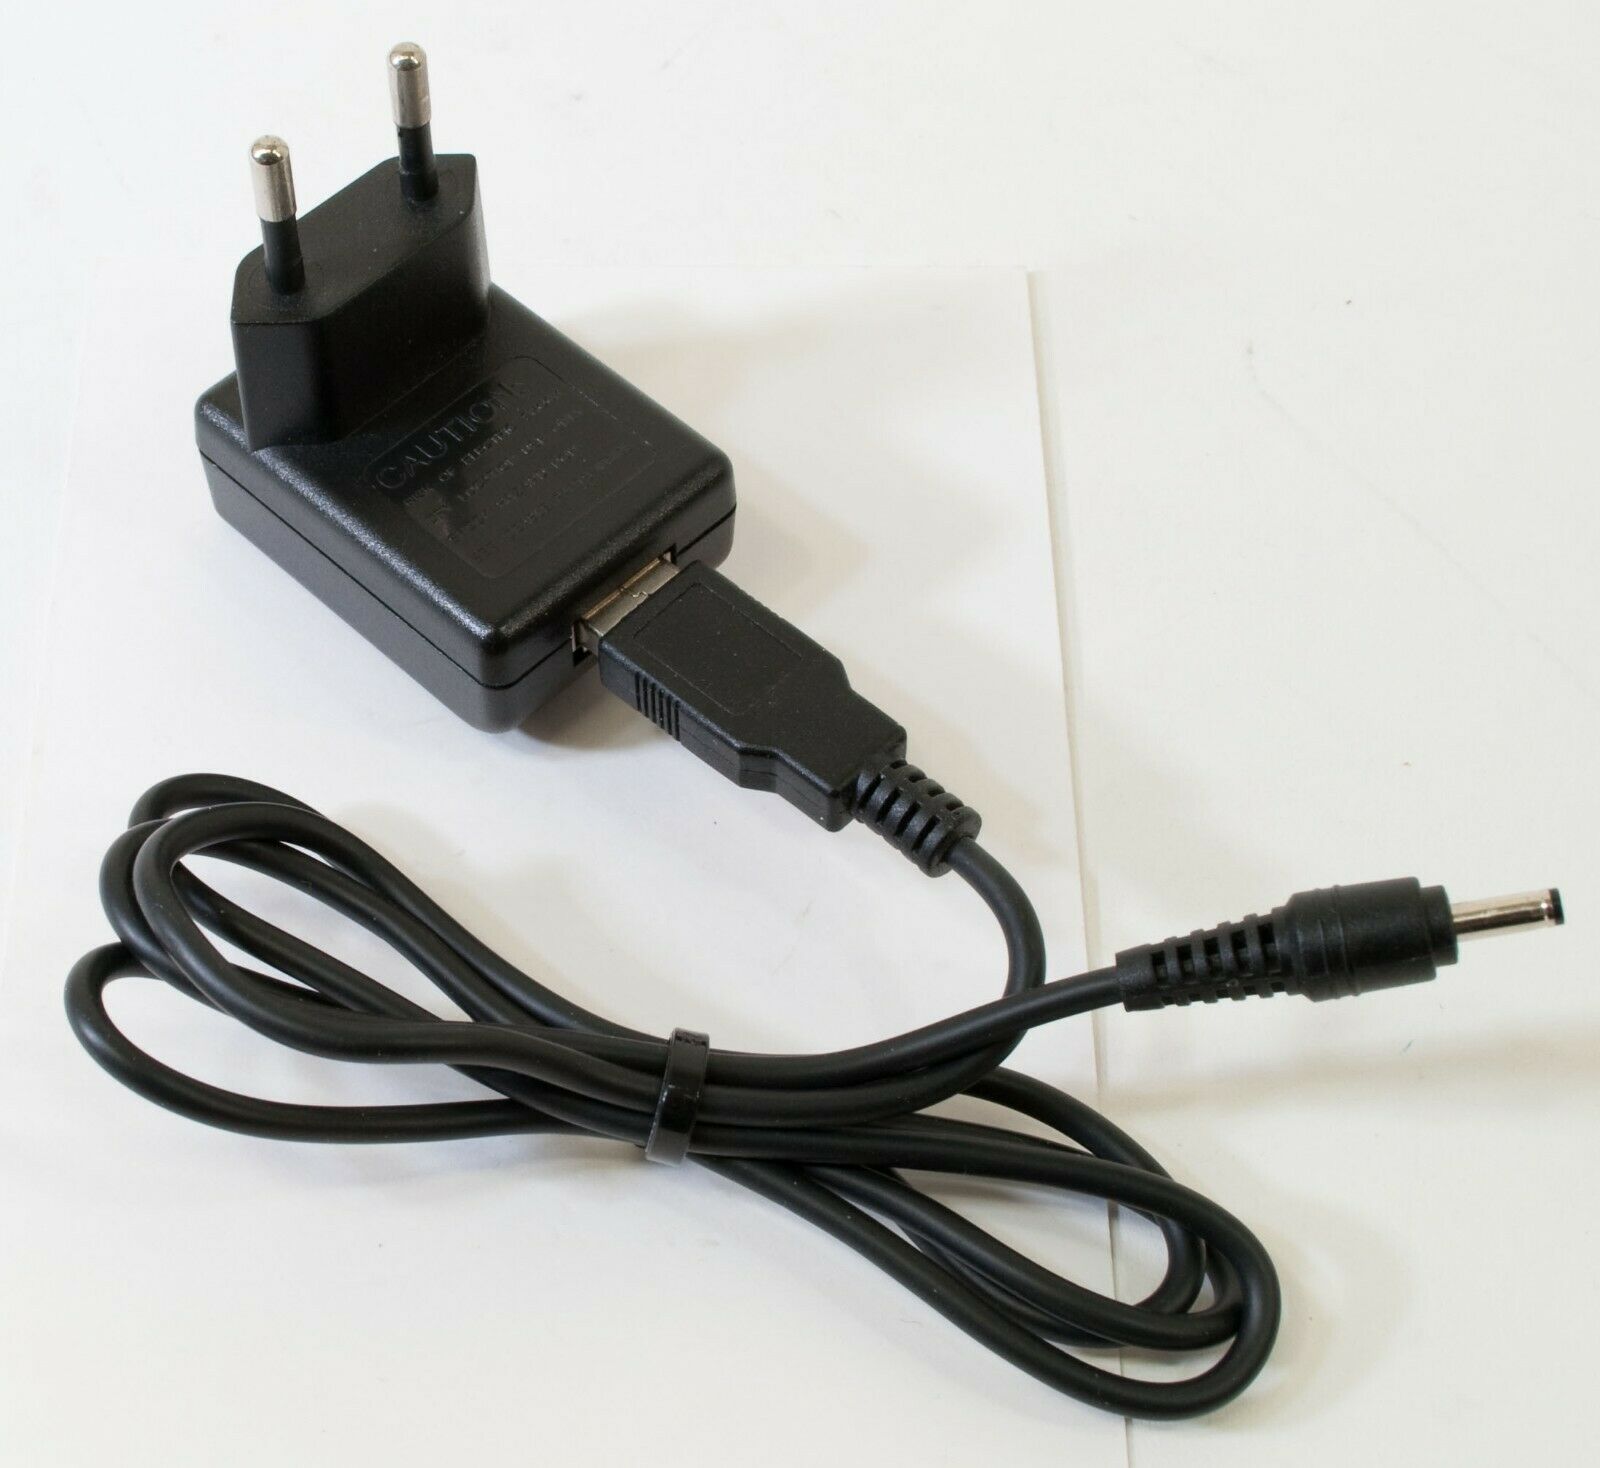 Anthin APE305UB-0510 AC Adapter 5V 1A Original I.T.E. Power Supply Brand: Anthin Compatible Brand: For Anthin Type: